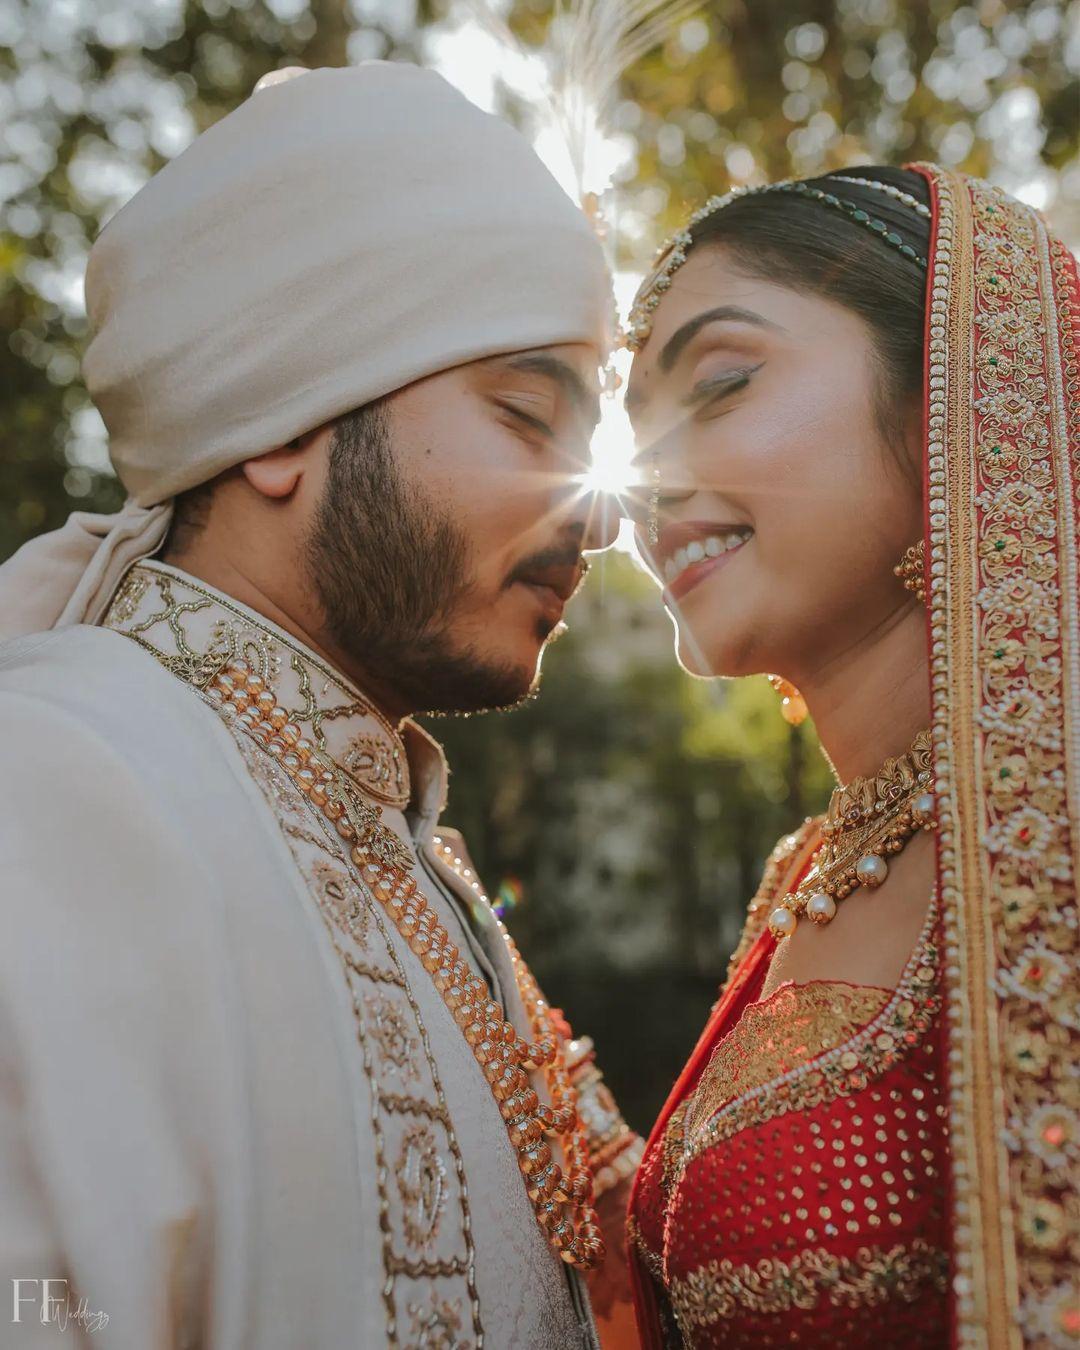 Young Indian Bride Groom Posing Photograph Stock Photo 1515434438 |  Shutterstock